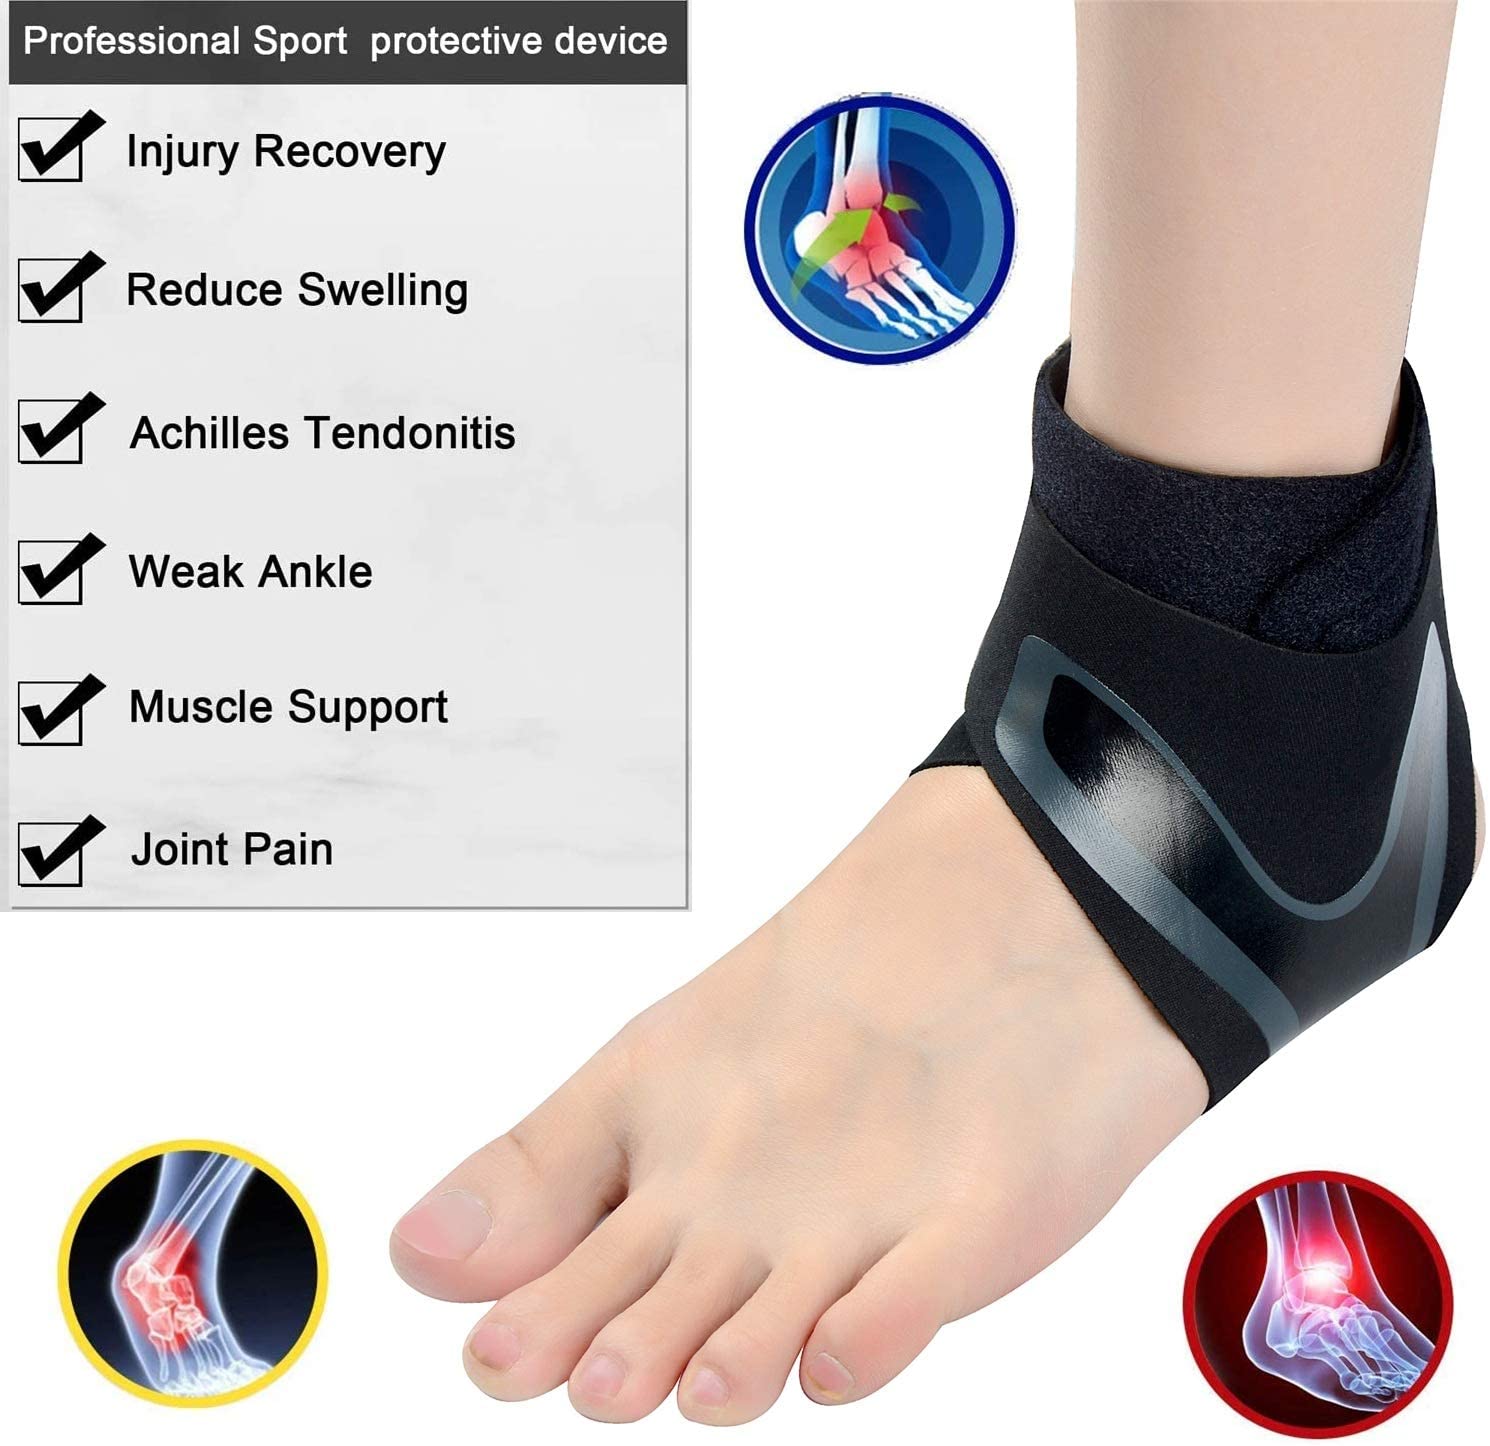 Ankle Support Brace, Adjustable Ankle Brace with Breathable